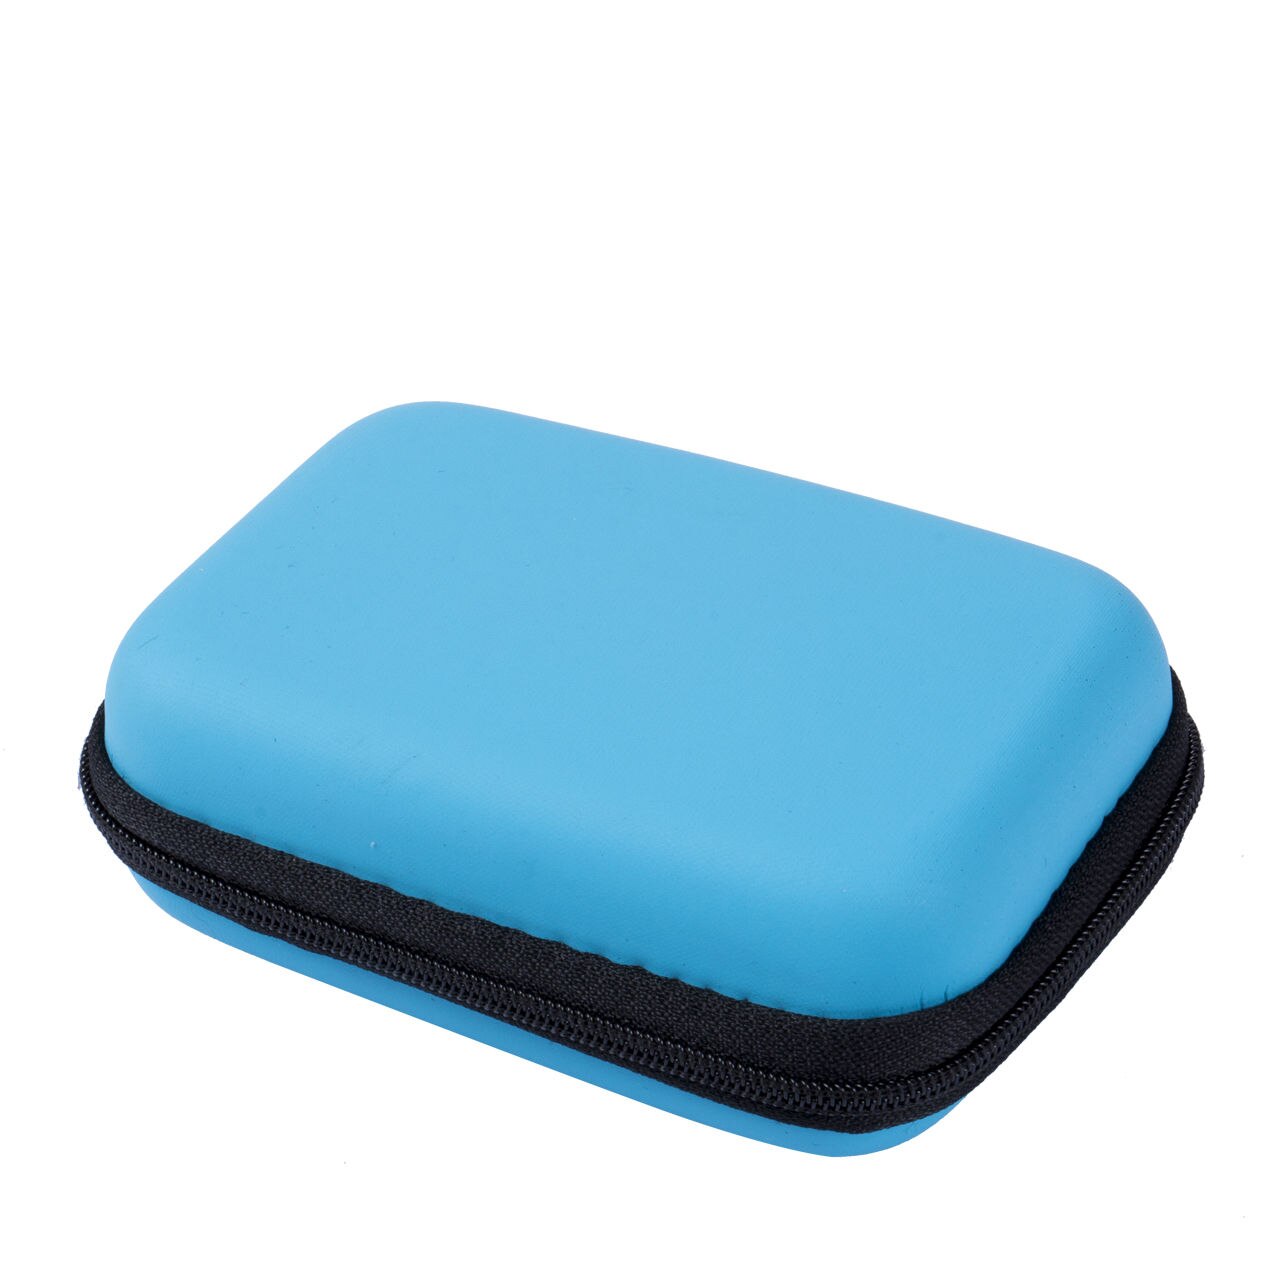 Travel Digital USB Storage Portable Travel Headset Earphone Earbud Cable Storage Pouch Bag Hard Case Box: Blue